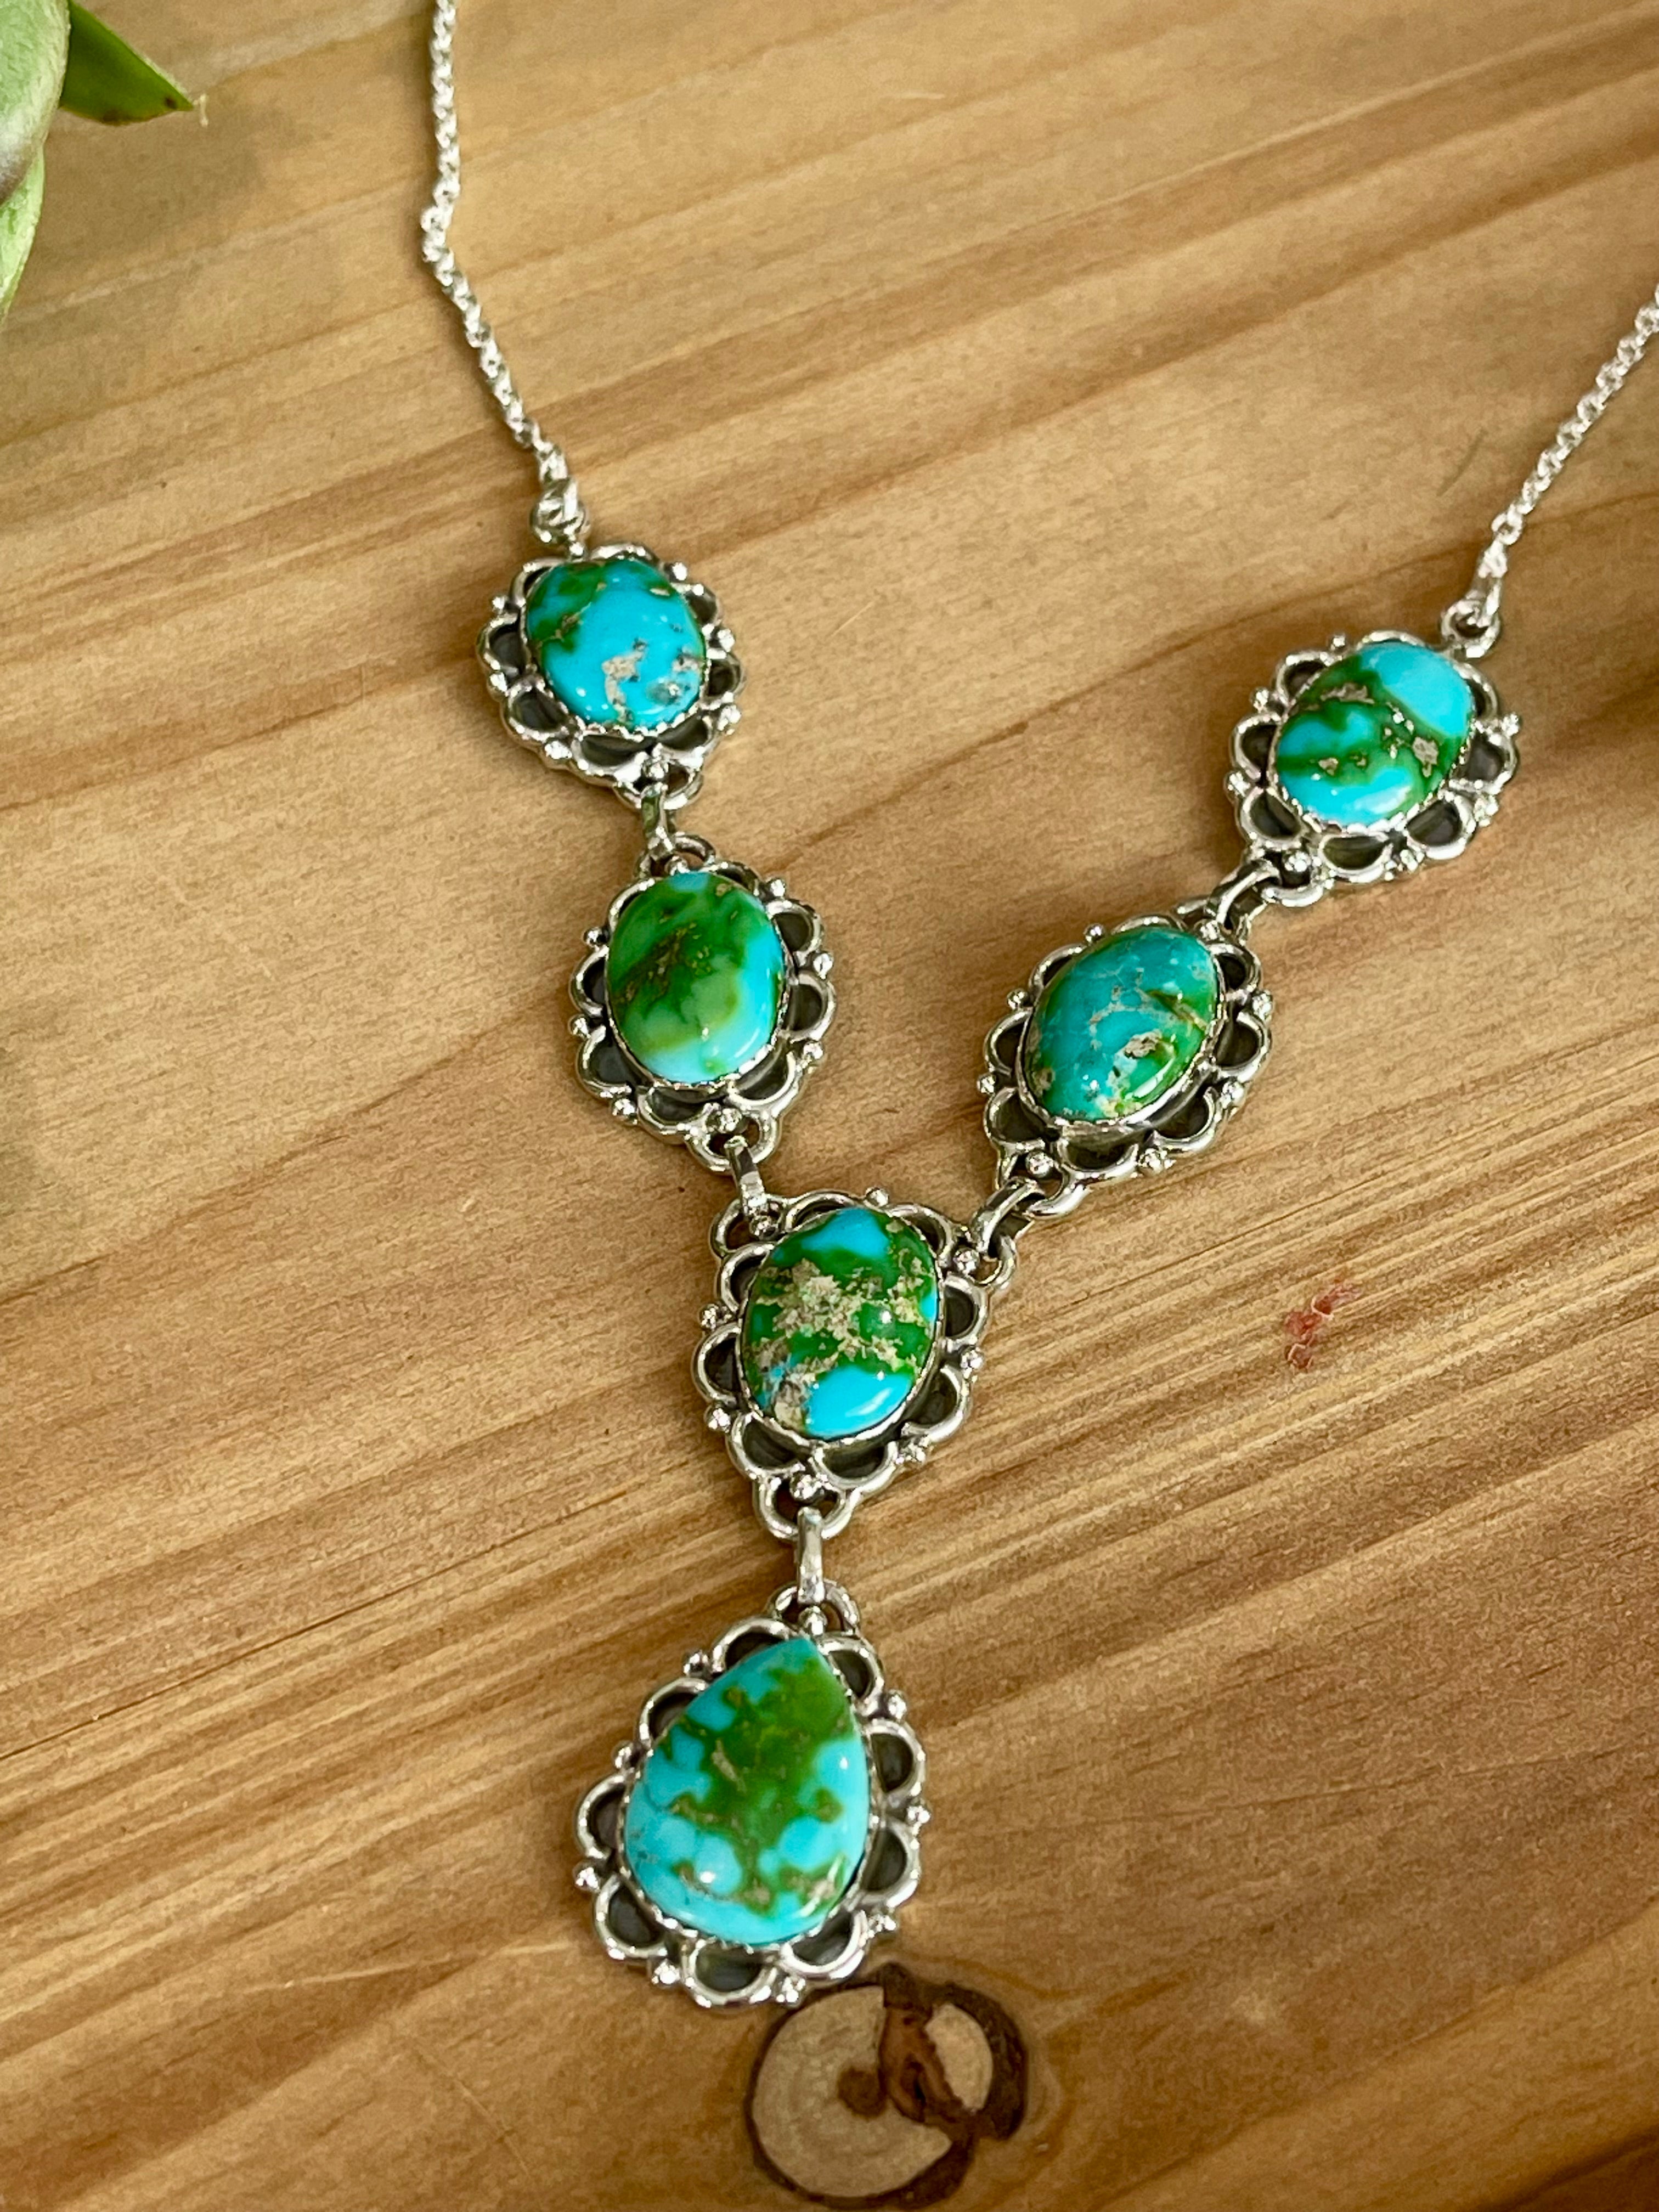 Southwest Handmade Sonoran Mountain Turquoise & Sterling Silver Lariat Necklace